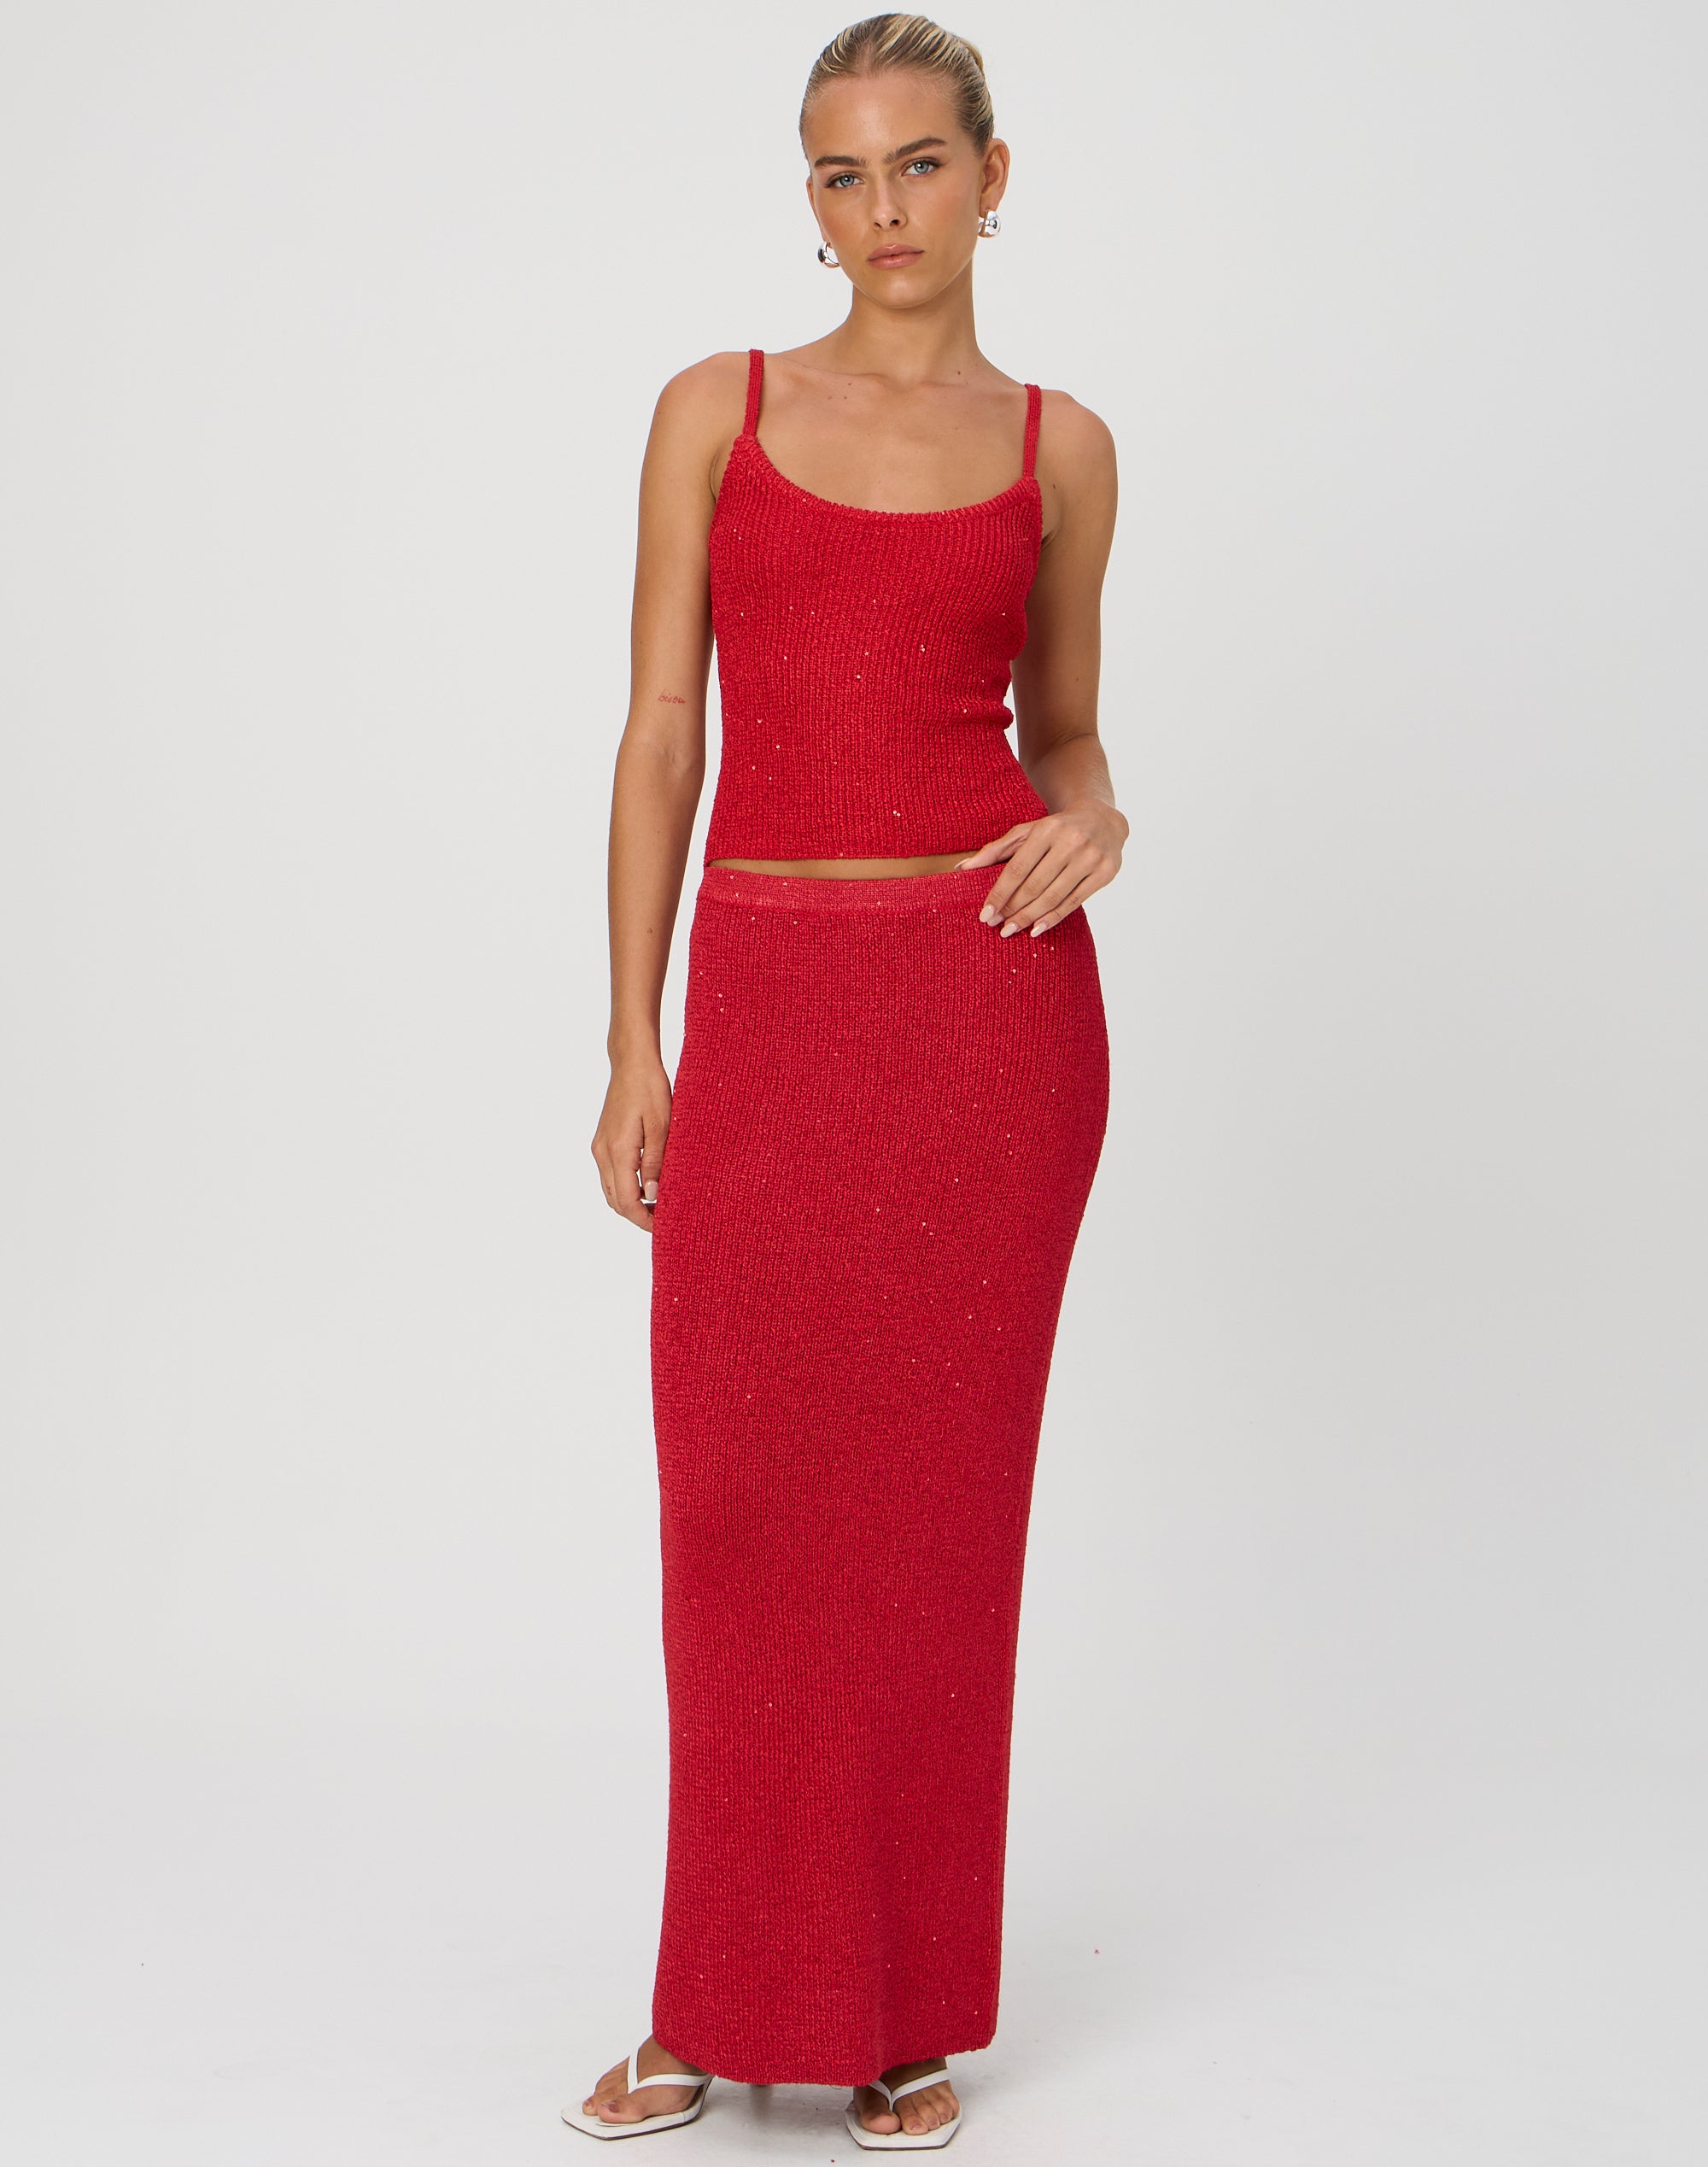 Sequin Knit Maxi Skirt in Mulan Red